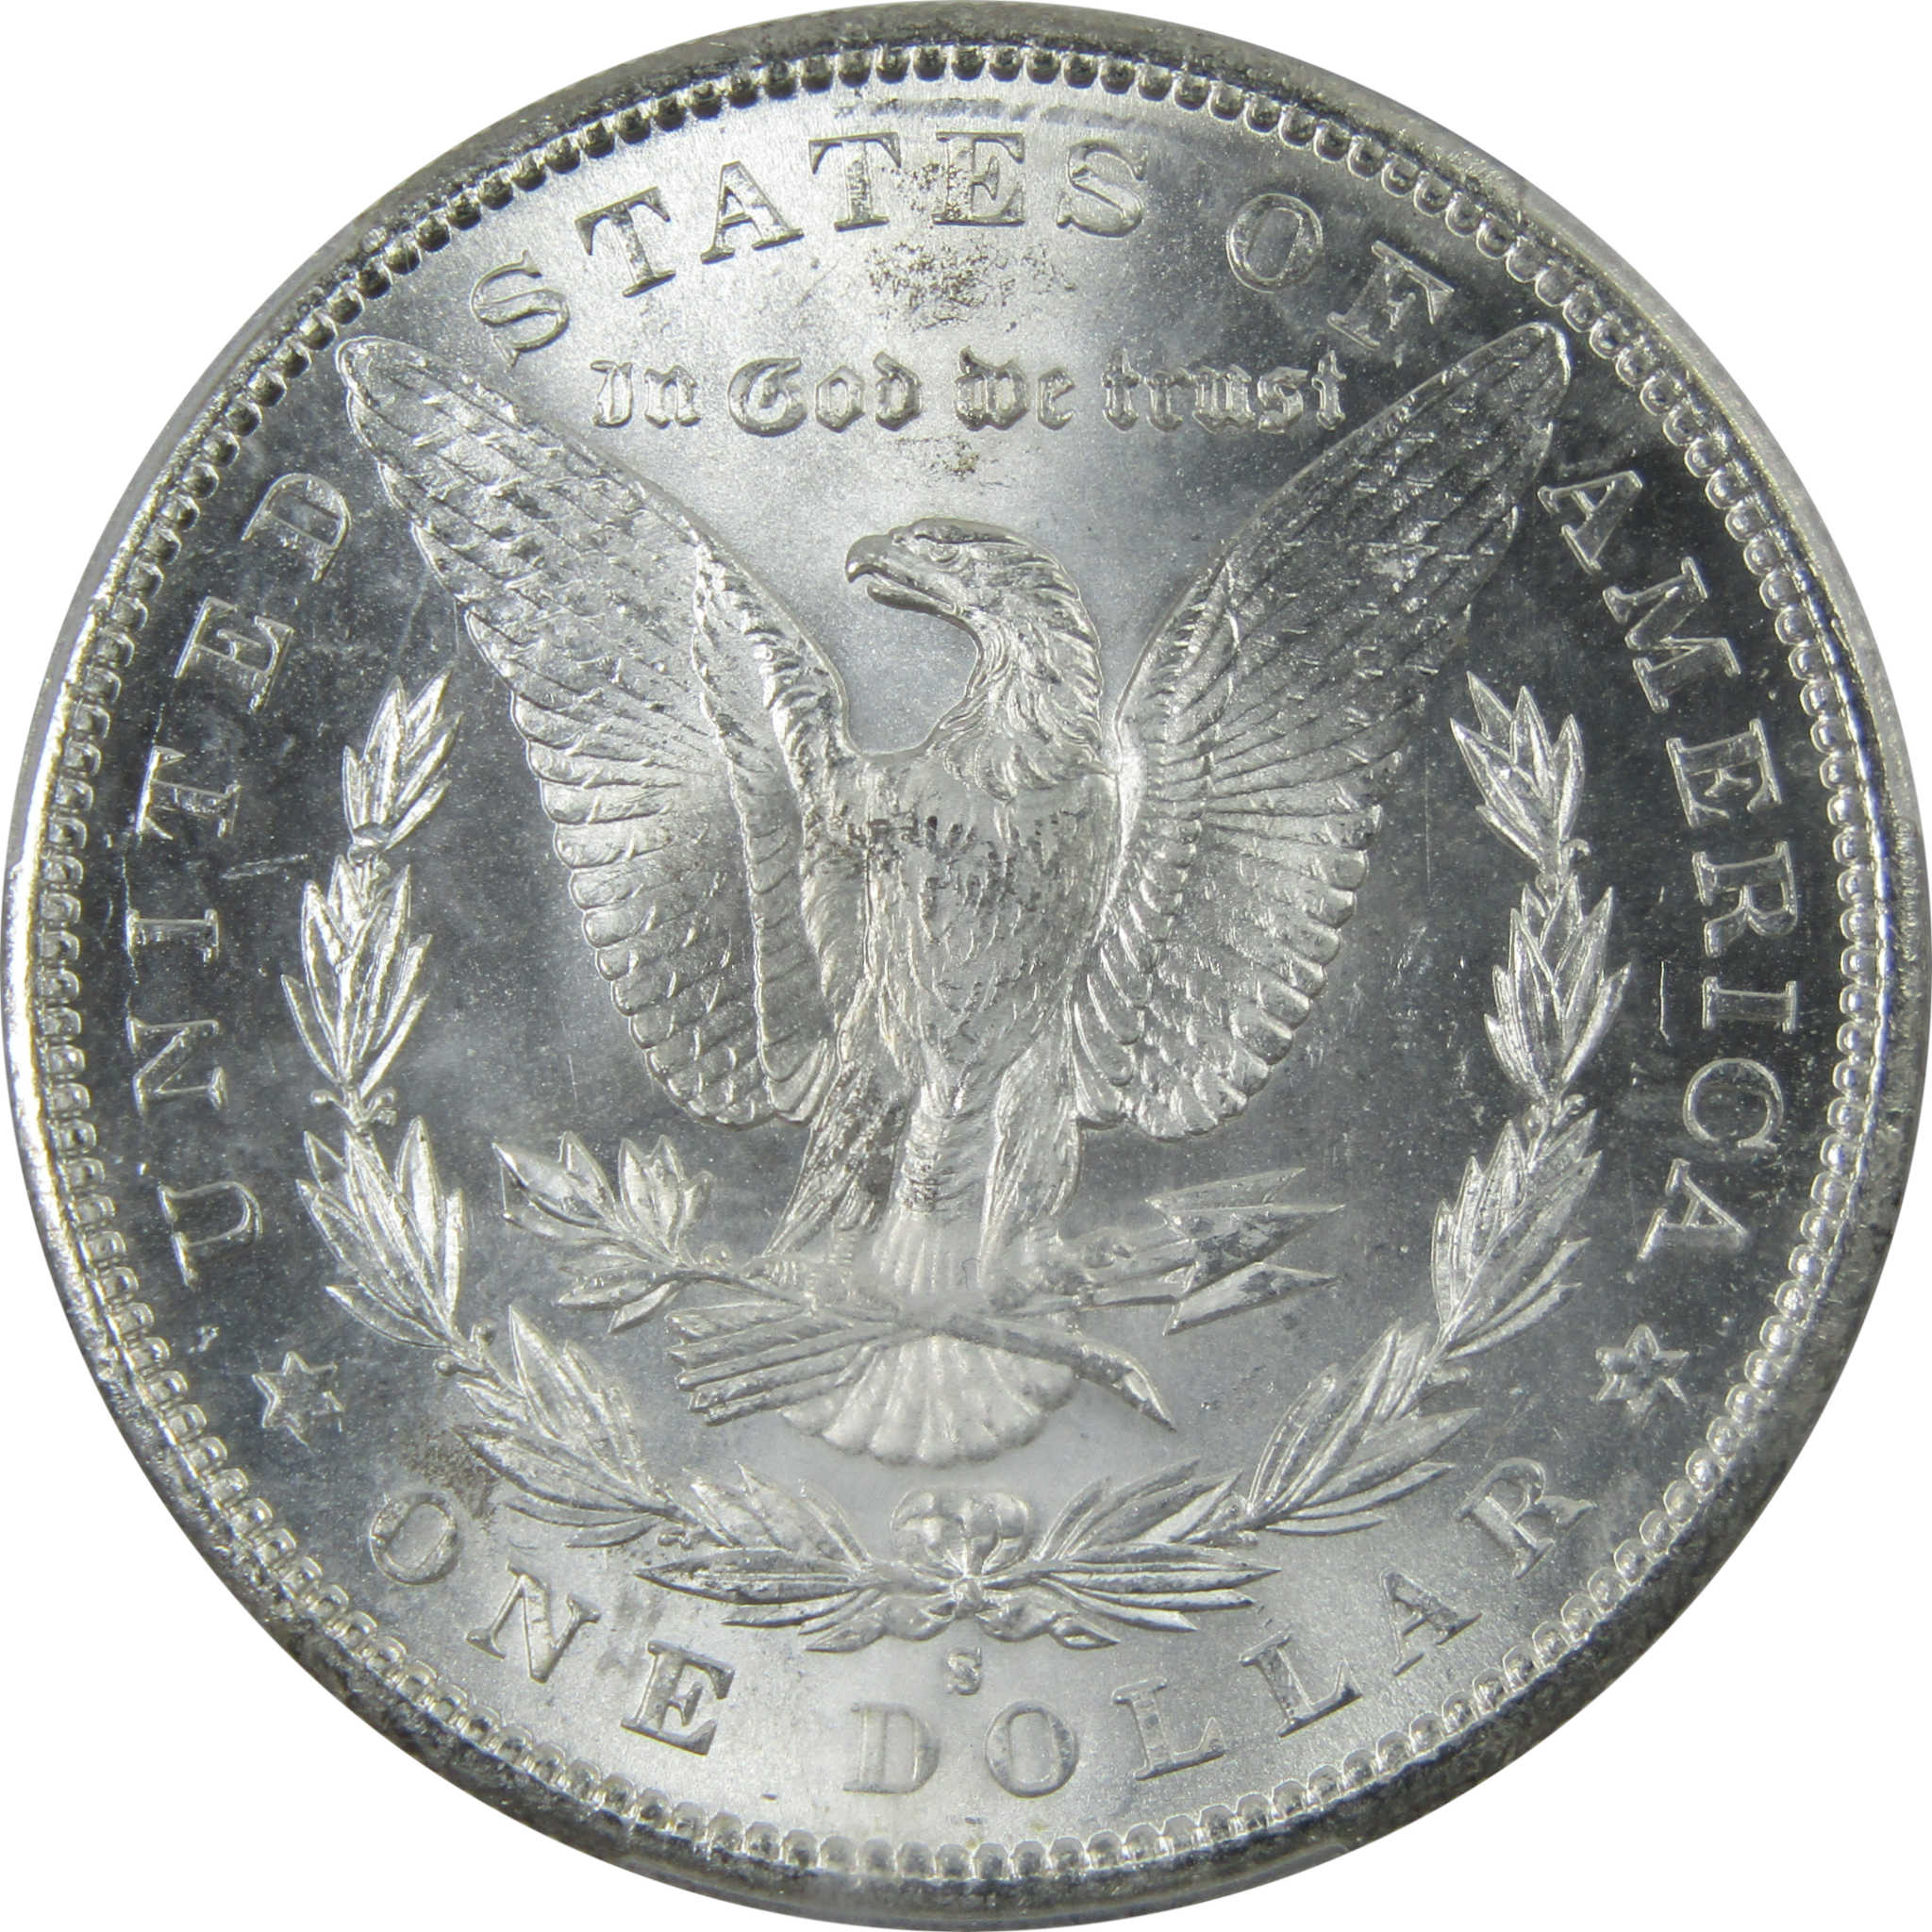 1897 S Morgan Dollar MS 64 PCGS Silver $1 Uncirculated Coin SKU:I13924 - Morgan coin - Morgan silver dollar - Morgan silver dollar for sale - Profile Coins &amp; Collectibles